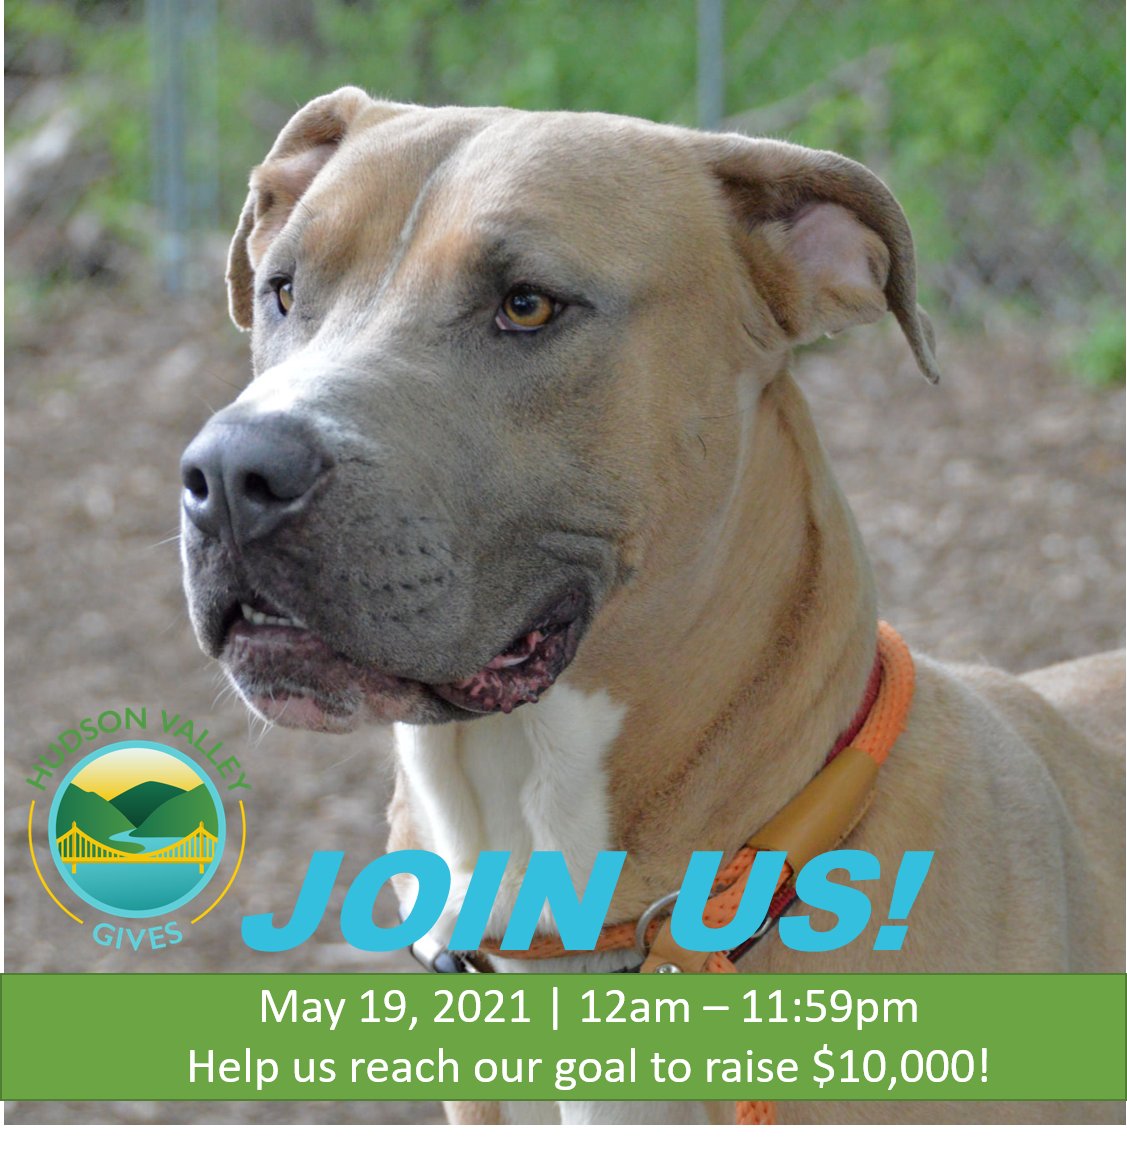 Help us reach our goal to raise $10,000 in 24 hrs for the animals in our #HVGives fundraising campaign - runs thru midnight. Your gift will help pets like Jake, pictured here. Read his story - and find a link to our HVGives donate page: petsalive.com/PABlog/2021/05…